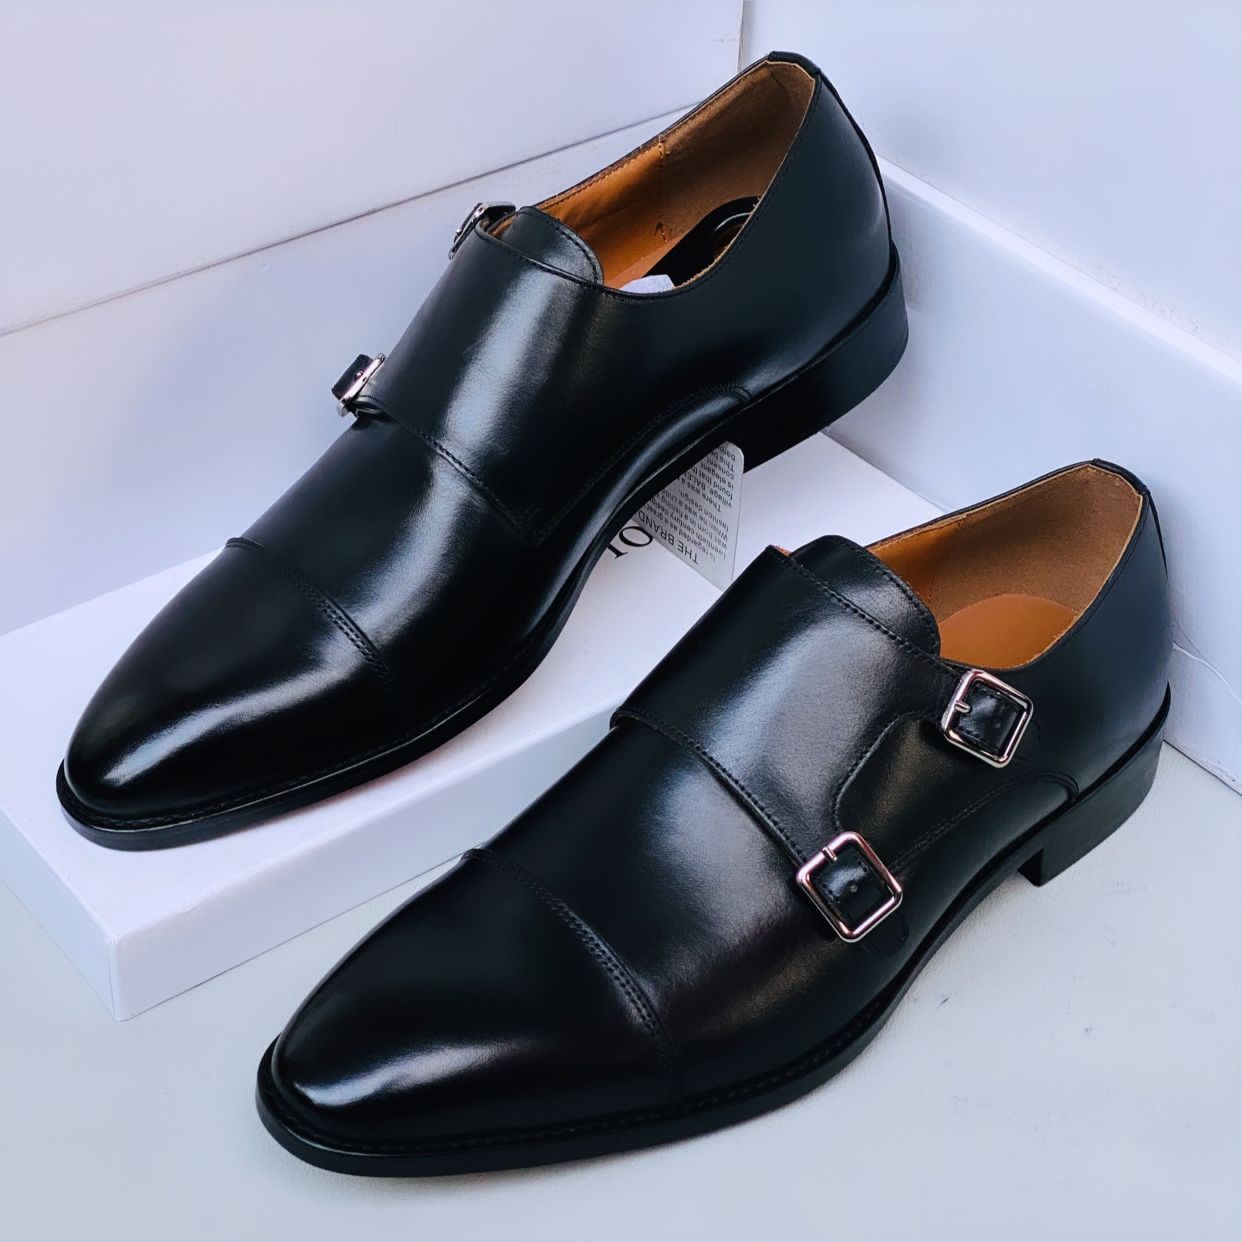 Frank Perry Double Monk Strap Shoe | Buy Online At The Best Price In Accra